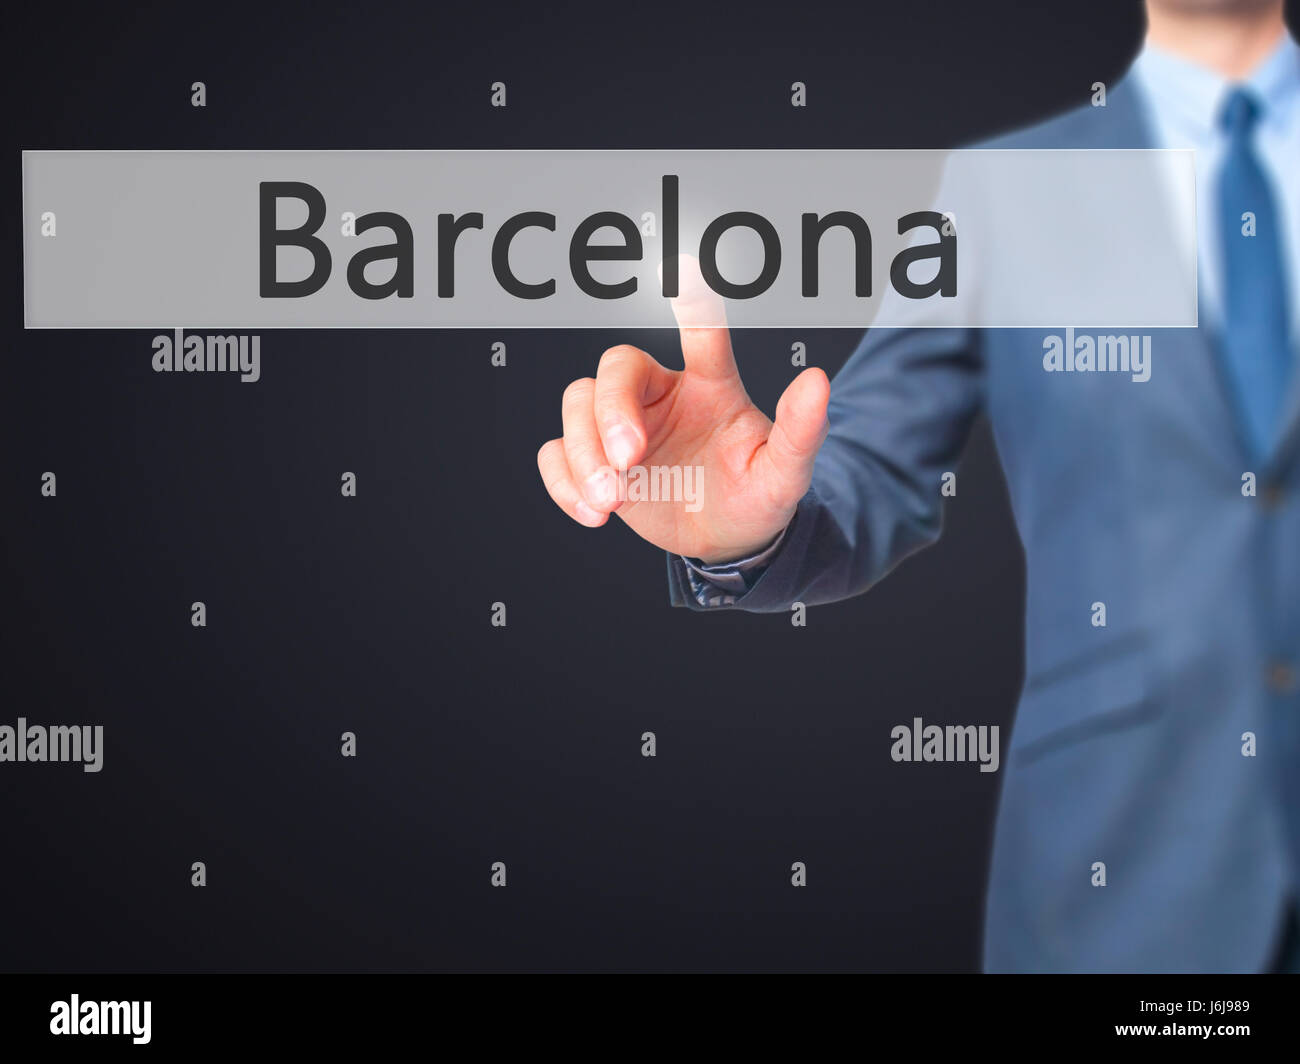 Barcelona - Businessman hand pressing button on touch screen interface. Business, technology, internet concept. Stock Photo Stock Photo